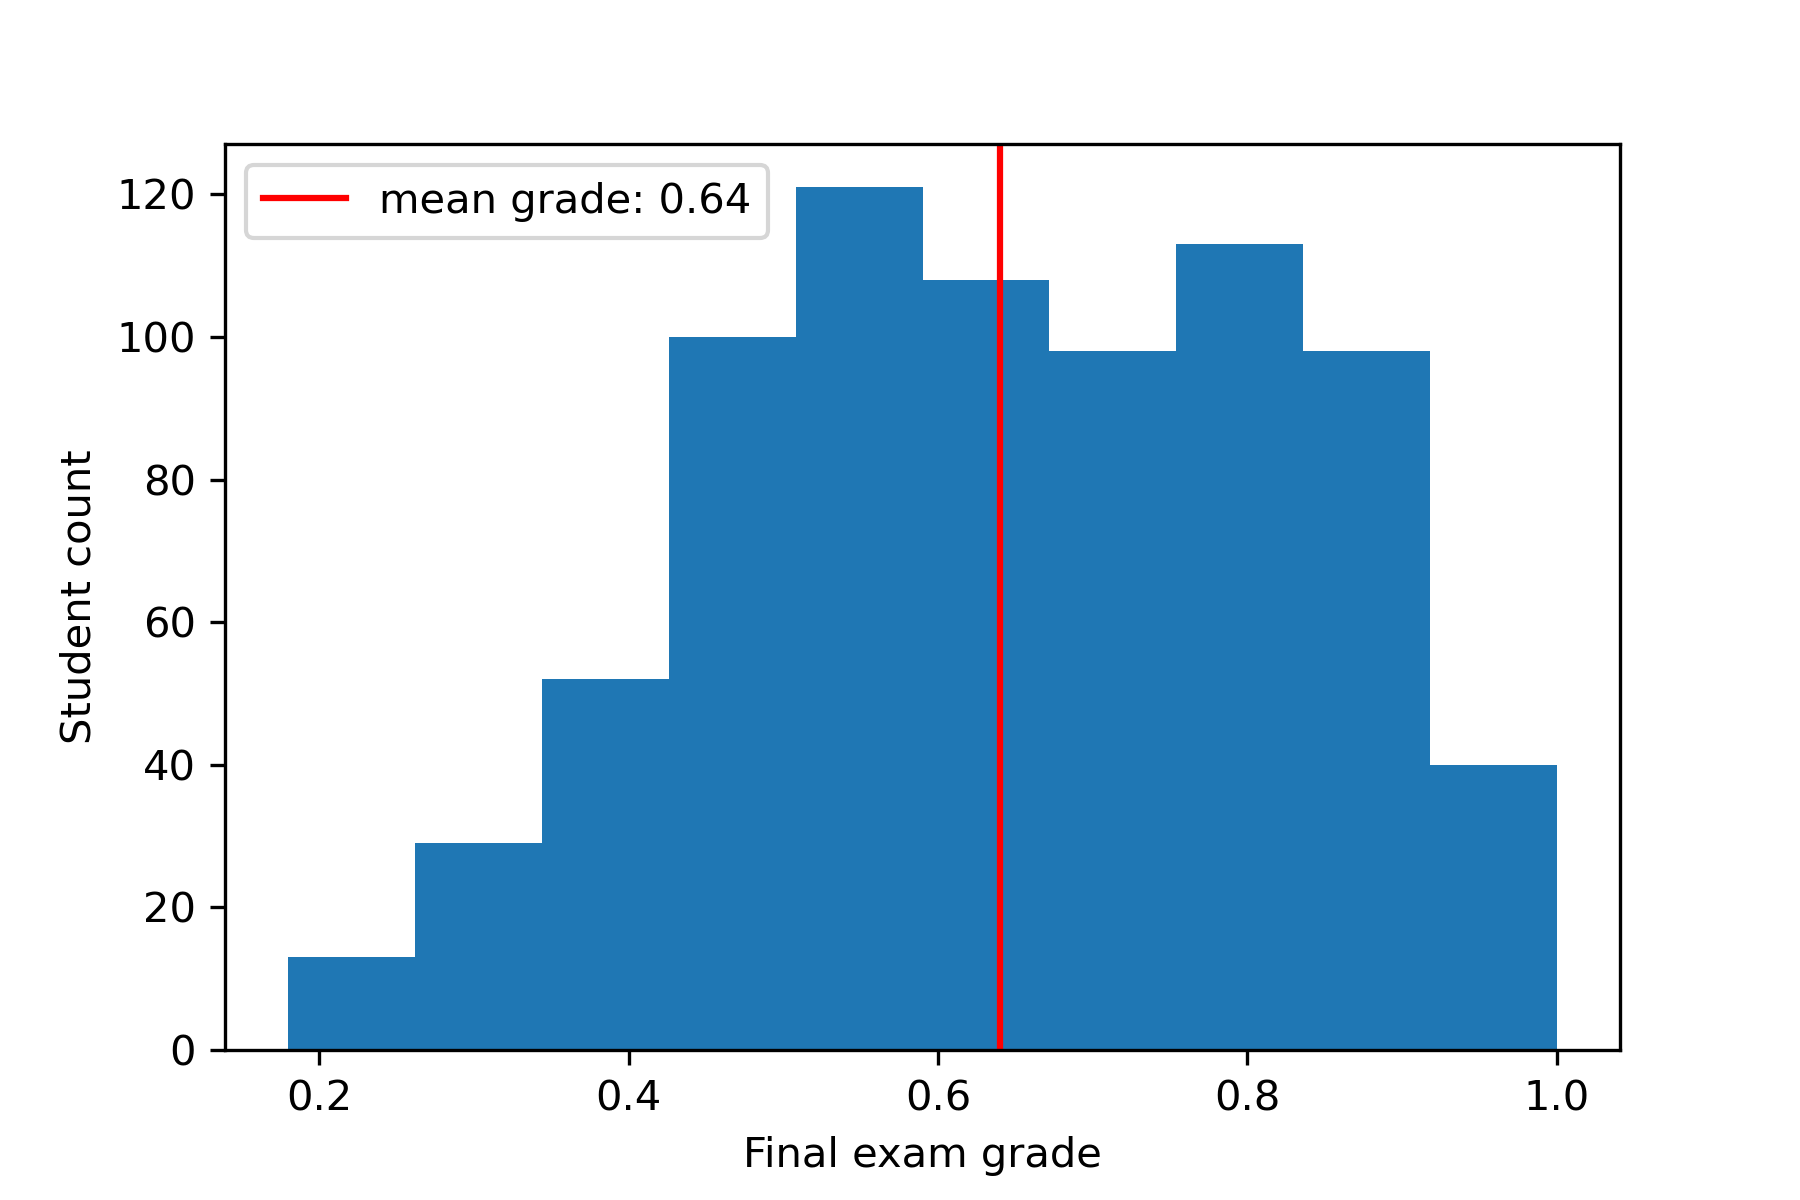 Grade distribution of the final exam grades of students with the mean grade.